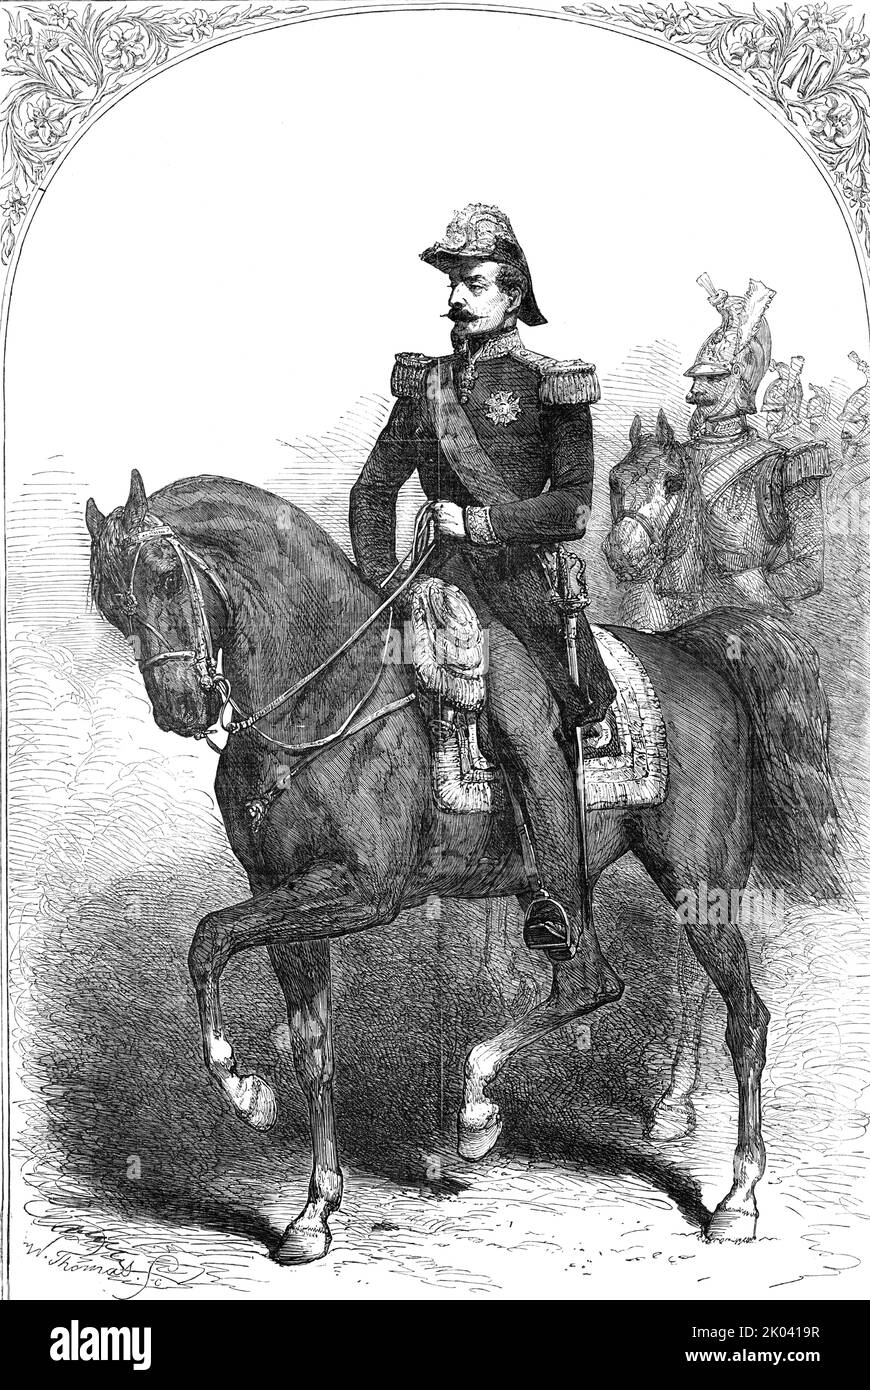 His Imperial Majesty Napoleon III, 1854. '...the Emperor...will visit her Majesty at Windsor Castle. We are certain, from the whole tone of public feeling, that his reception in this country will be worthy of, and tend to strengthen, the firm alliance which already subsists between France and Great Britain - an alliance that may well repay the whole coset of the [Crimean] war, in the blessings for both nations which may be expected to flow from it. While France and England remain united, the guilty ambition of such men as the Emperor of Russia will always be held in check. The two nations have Stock Photo